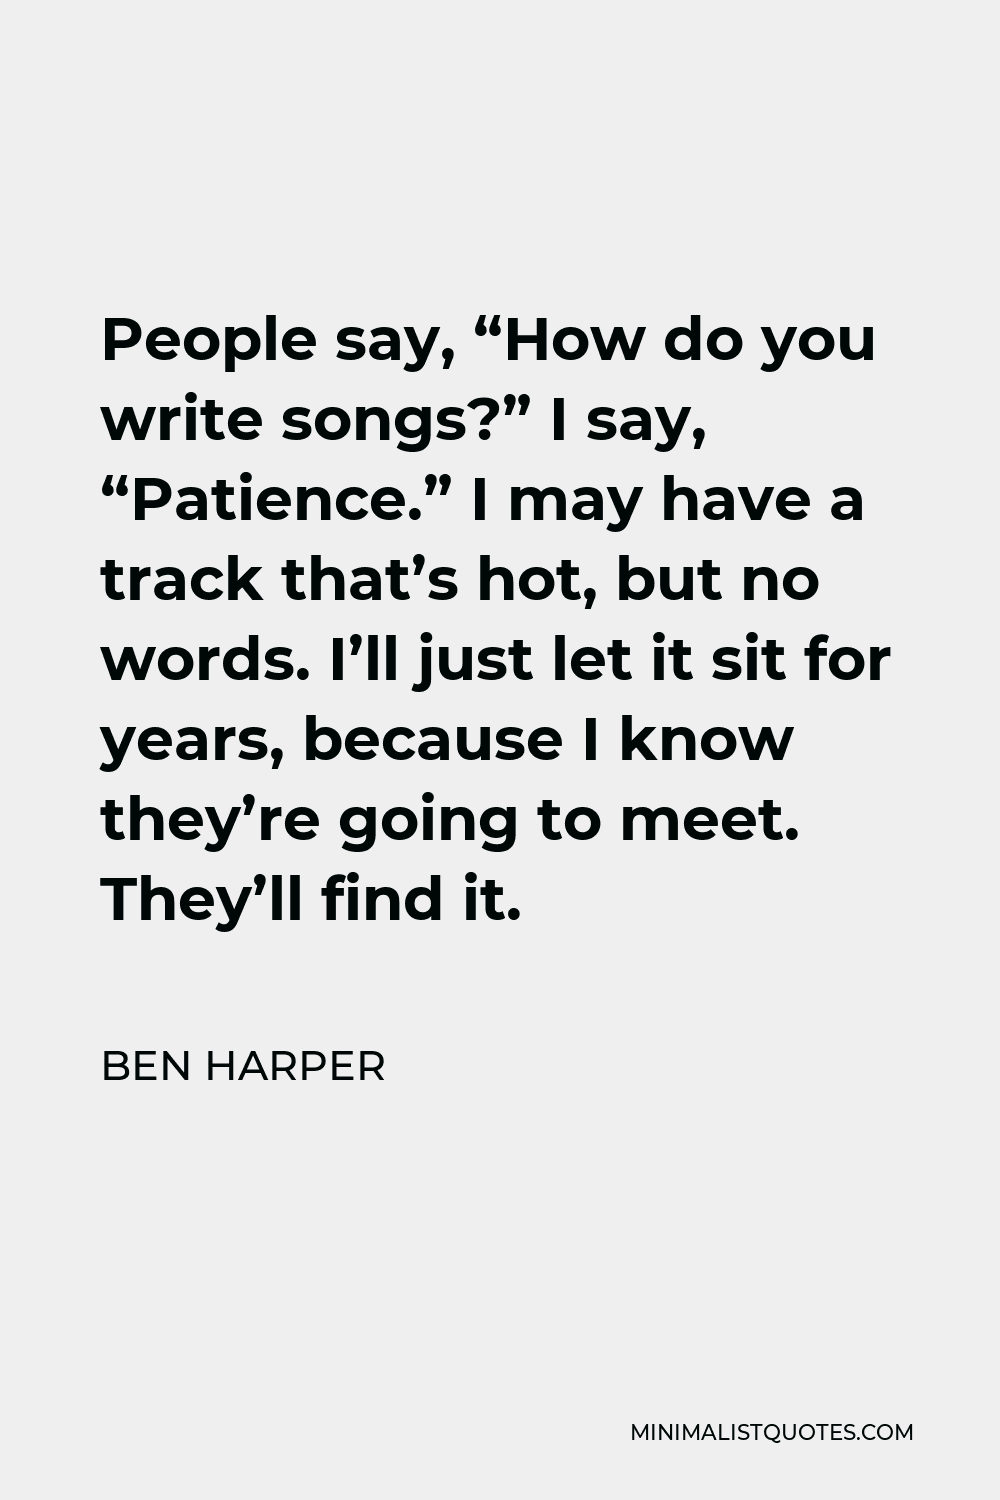 Ben Harper Quote - People say, “How do you write songs?” I say, “Patience.” I may have a track that’s hot, but no words. I’ll just let it sit for years, because I know they’re going to meet. They’ll find it.